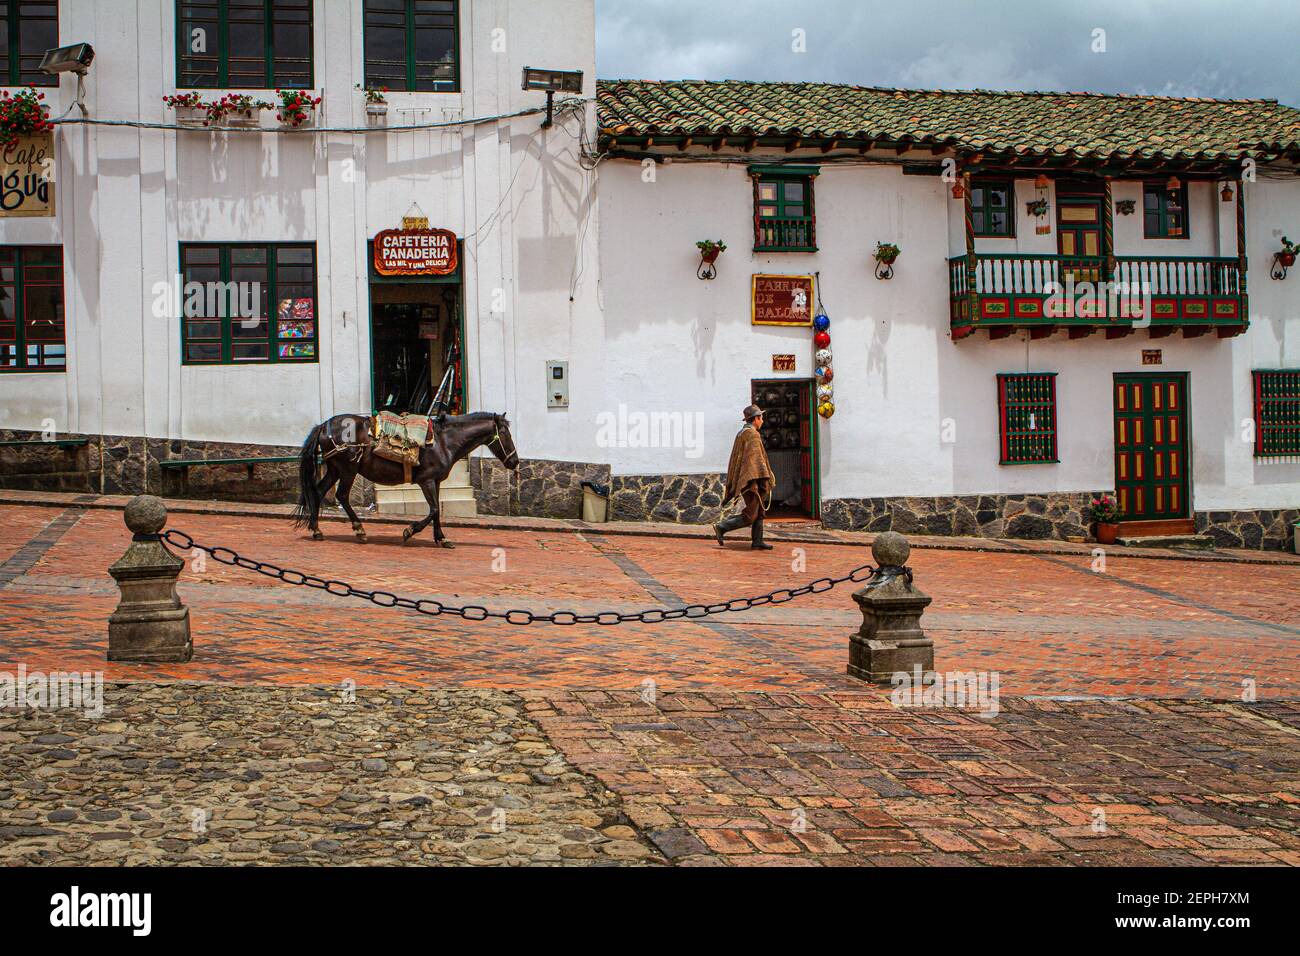 horse, with Colombian farmer traditional poncho, ruana, hat.500 year old town.Colonial, Plaza de Bolívar, Tunja, Boyaca, Colombia Andes, South America Stock Photo